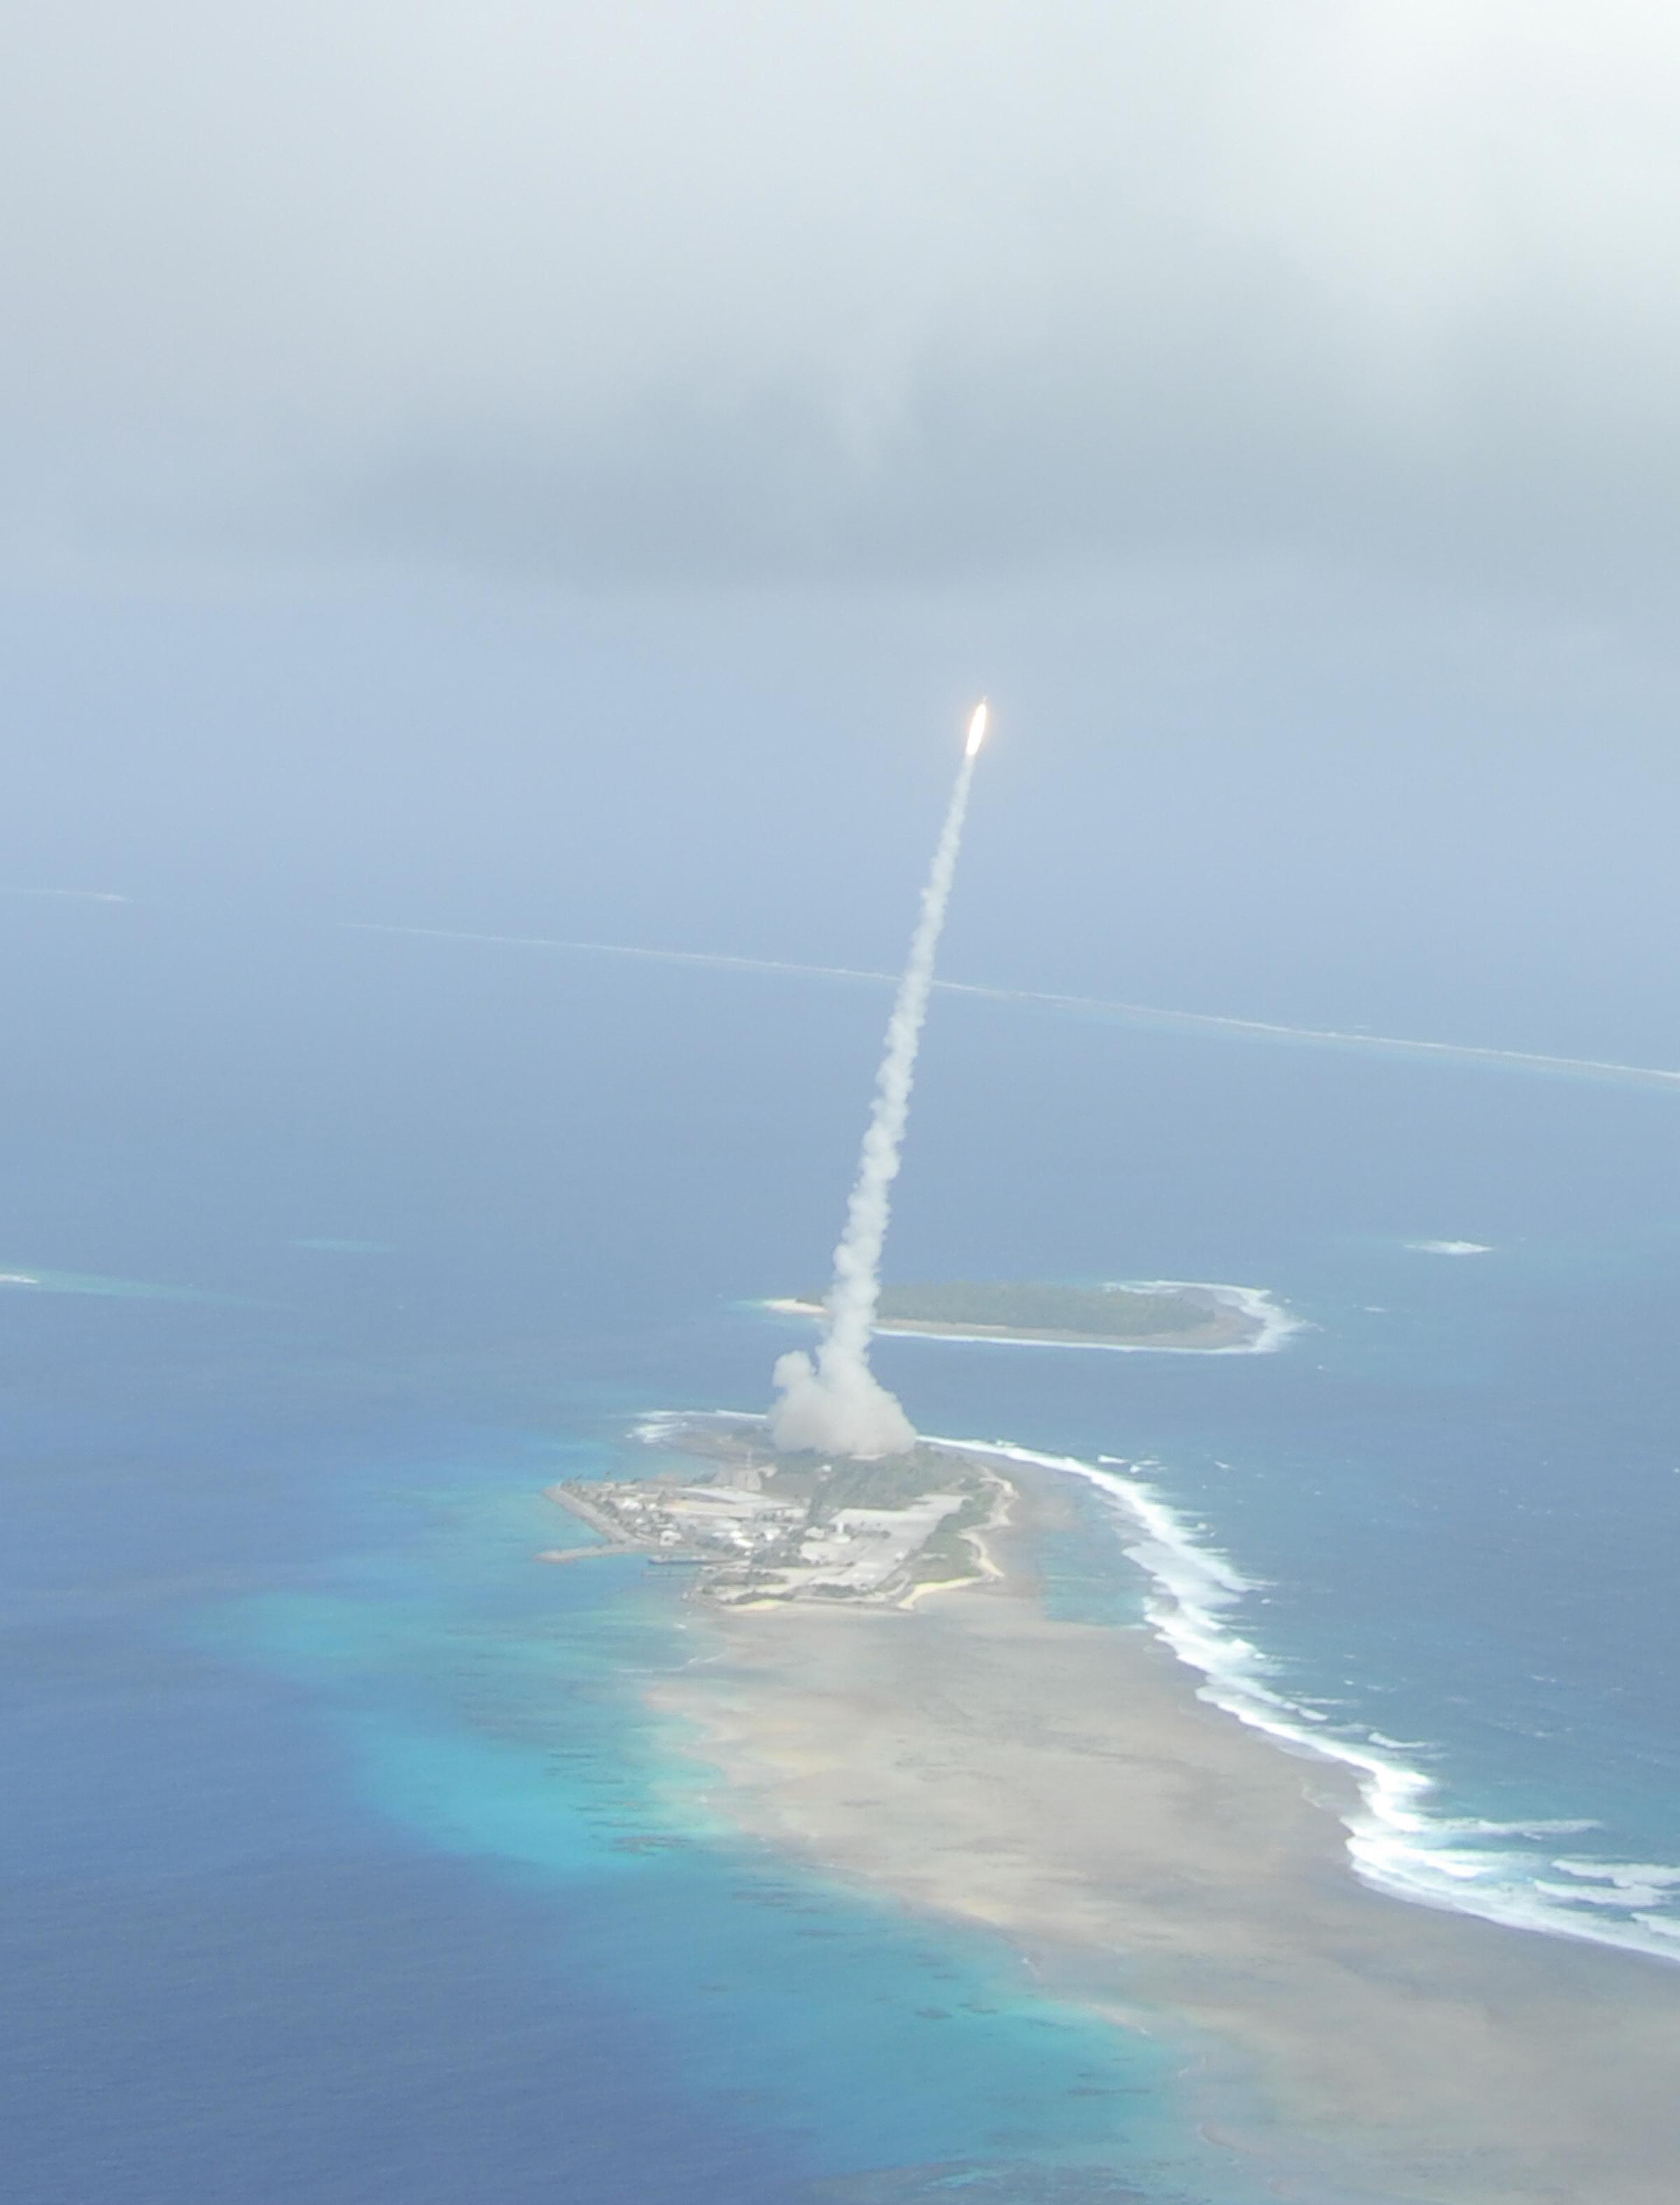 A missile being launched.